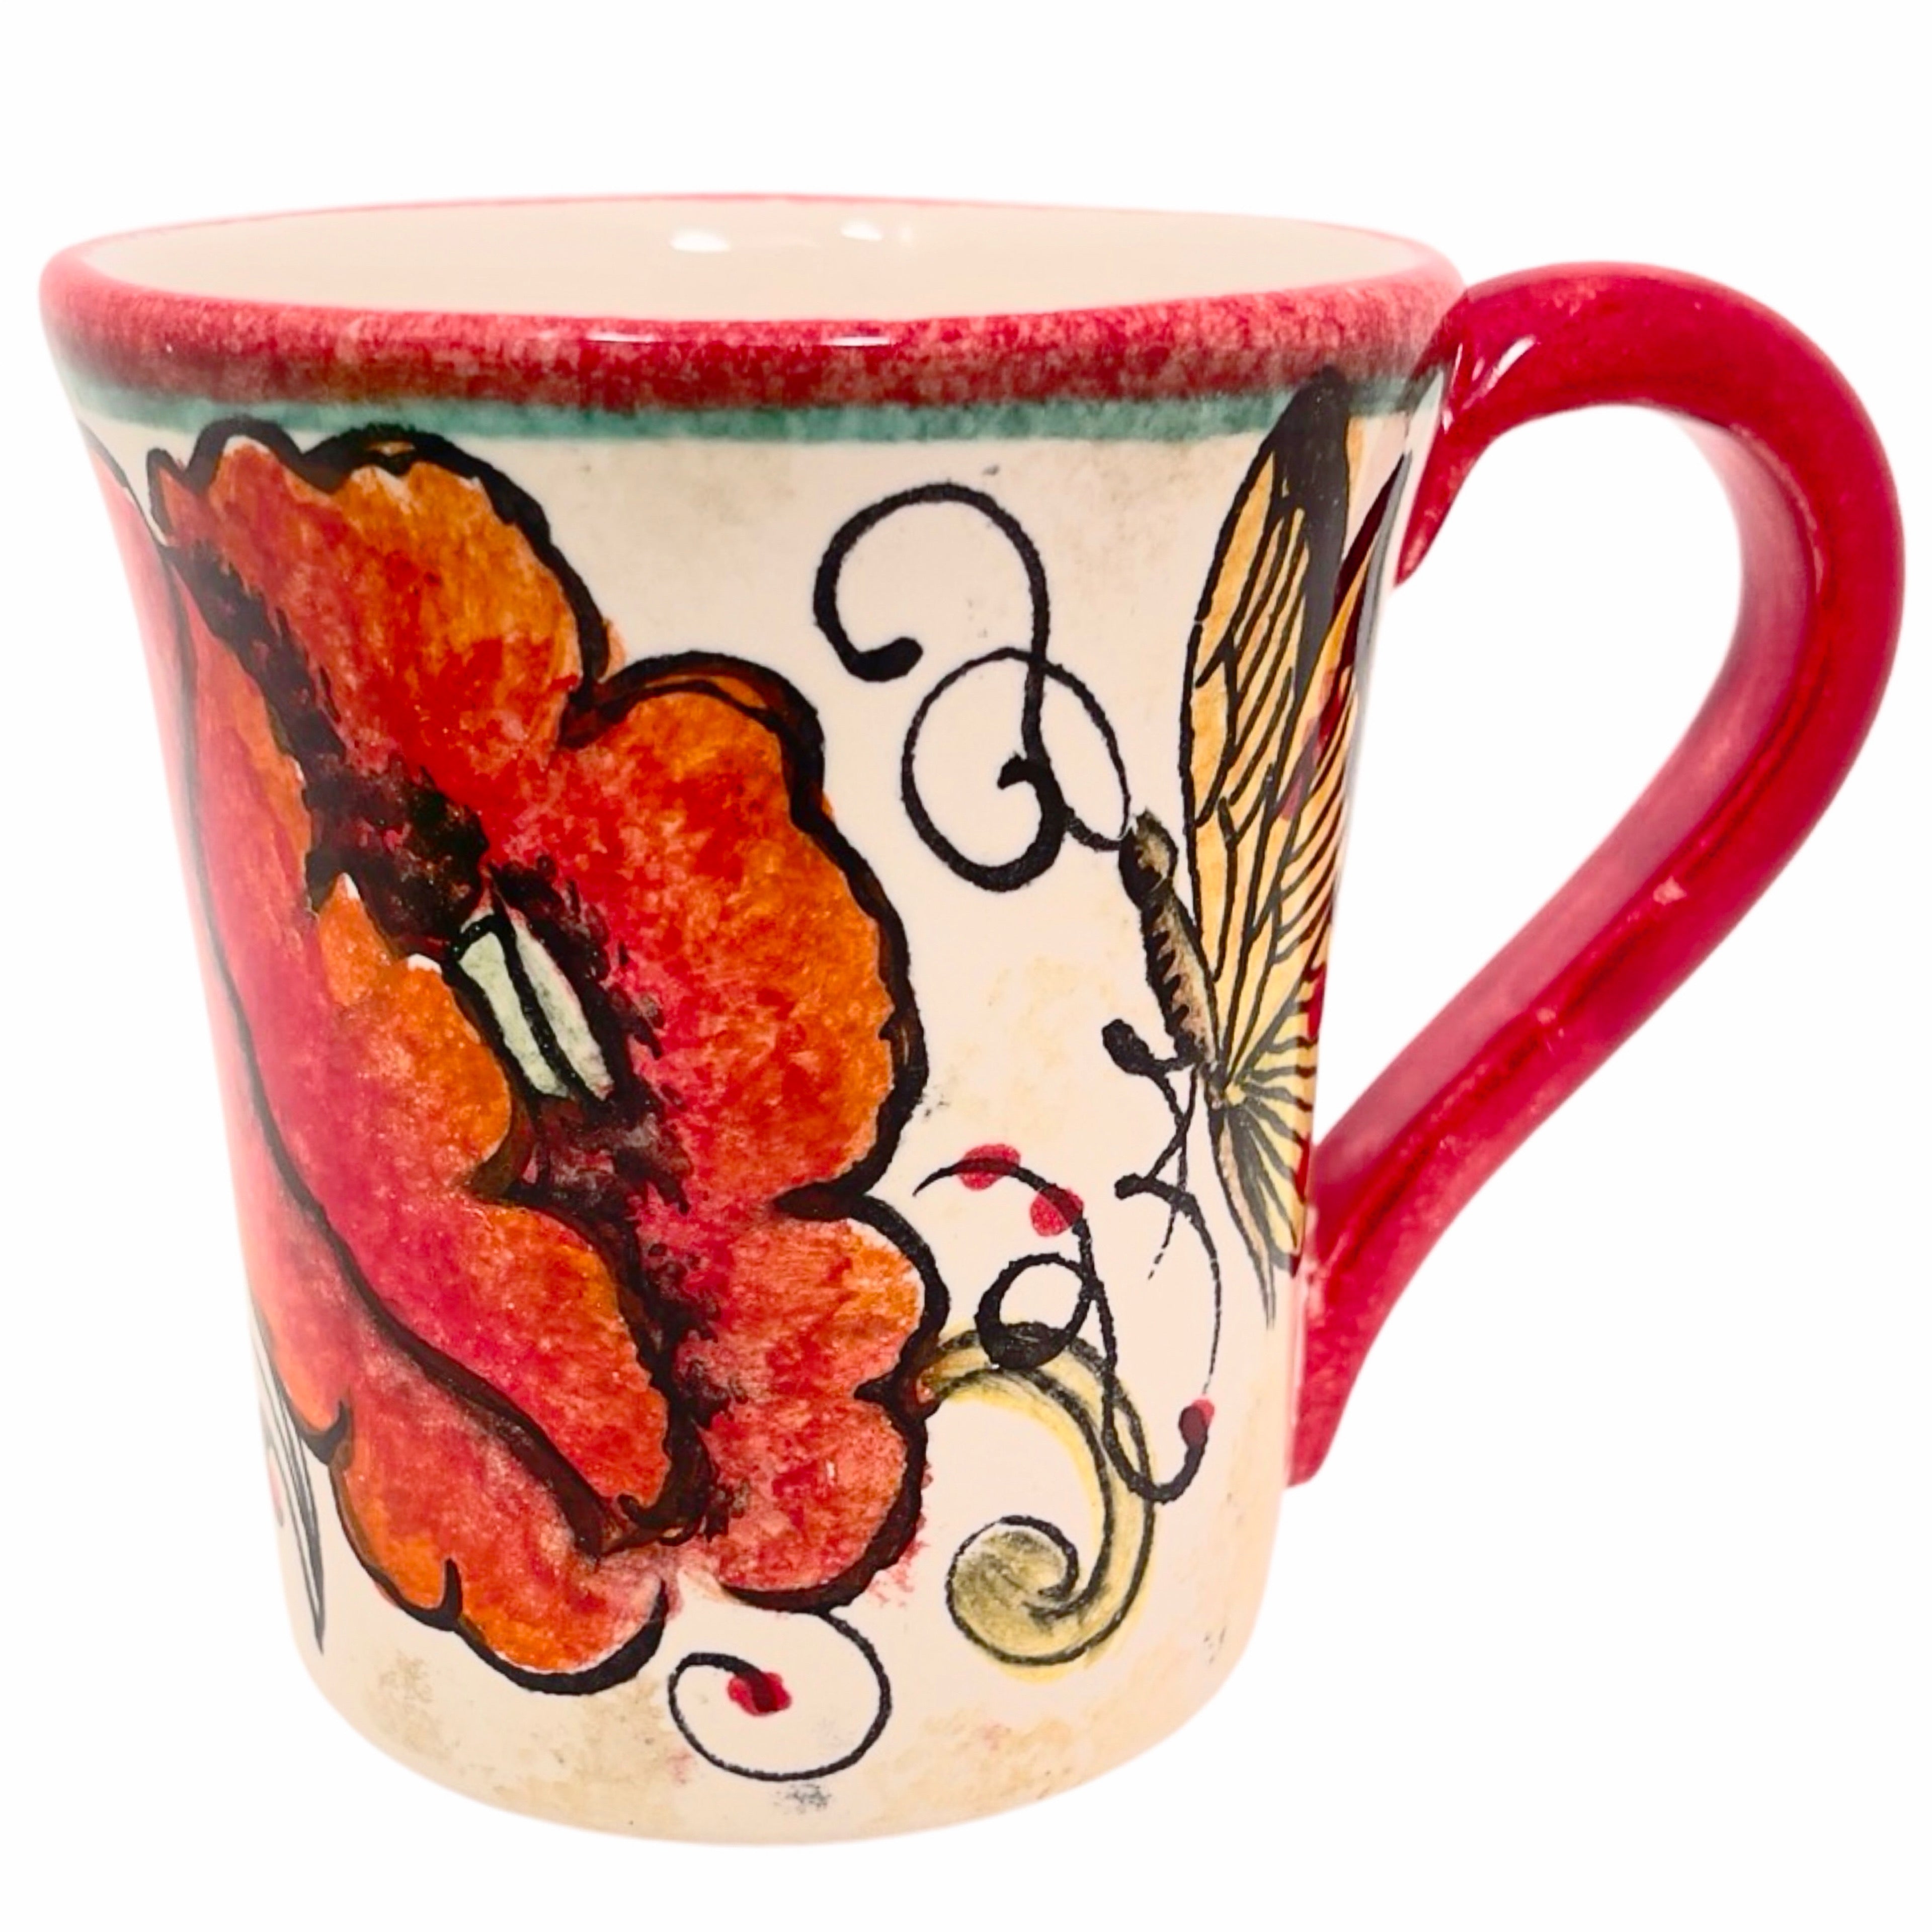 Poppy Mug, ceramics, pottery, italian design, majolica, handmade, handcrafted, handpainted, home decor, kitchen art, home goods, deruta, majolica, Artisan, treasures, traditional art, modern art, gift ideas, style, SF, shop small business, artists, shop online, landmark store, legacy, one of a kind, limited edition, gift guide, gift shop, retail shop, decorations, shopping, italy, home staging, home decorating, home interiors